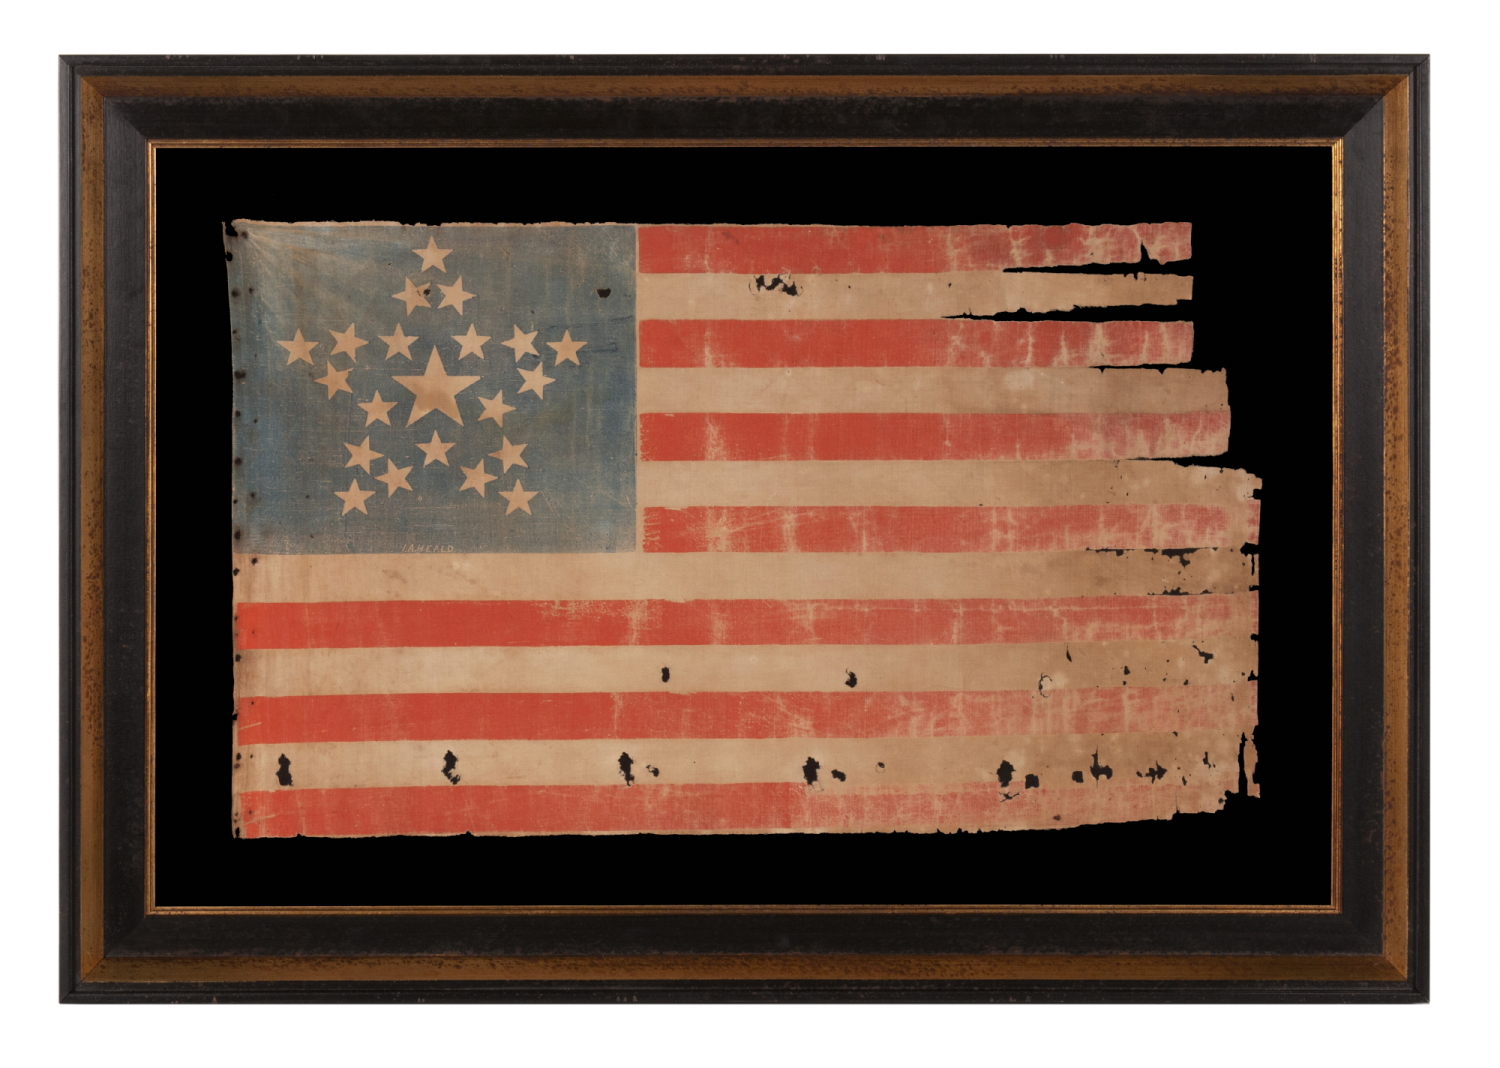 21 STARS IN A “GREAT STAR” OR “GREAT LUMINARY” PATTERN, A SOUTHERN-EXCLUSIONARY STAR COUNT ON AN ANTIQUE AMERICAN PARADE FLAG OF THE CIVIL WAR PERIOD, SIGNED BY THE MAKER, ONE-OF-A-KIND AMONG KNOWN EXAMPLES